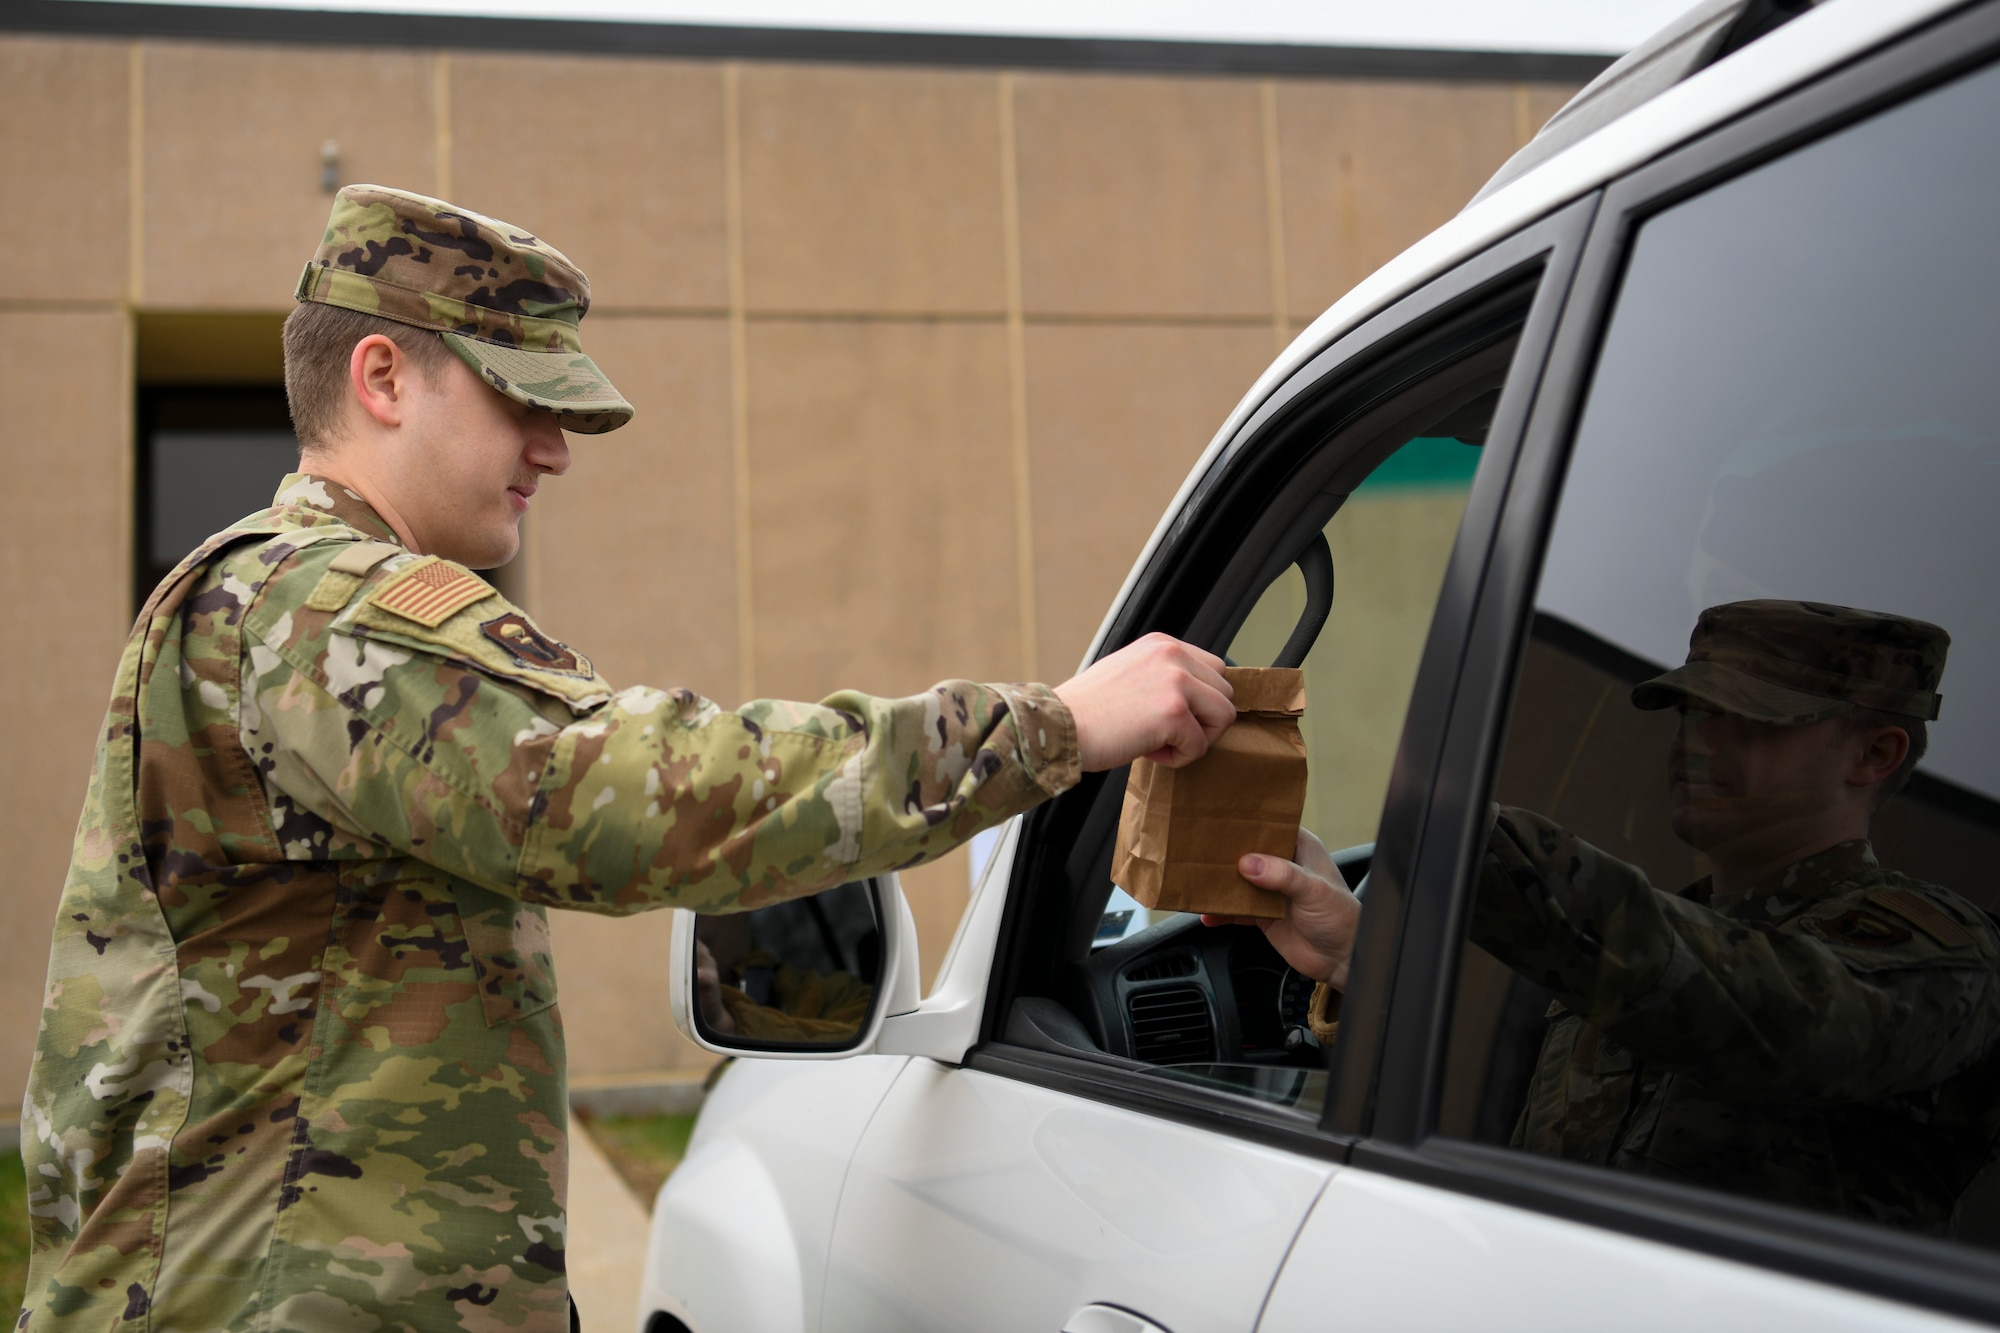 U.S. Air Force Staff Sgt. Nathan Jones, a 509th Operational Medical Readiness Squadron bioenvironmental technician and pharmacy augmentee, delivers prescriptions to a patient outside the 509th Medical Group, at Whiteman Air Force Base, Missouri, March 20, 2020. The medical group’s pharmacy implemented curbside pickup pharmacy procedures. The new service allows individuals with called-in refills and activated prescriptions to park in a designated parking spots and have their prescriptions delivered to the car. This procedure is part of the effort to limit visiting the facility. (U.S. Air Force photo by Staff Sgt. Dylan Nuckolls)